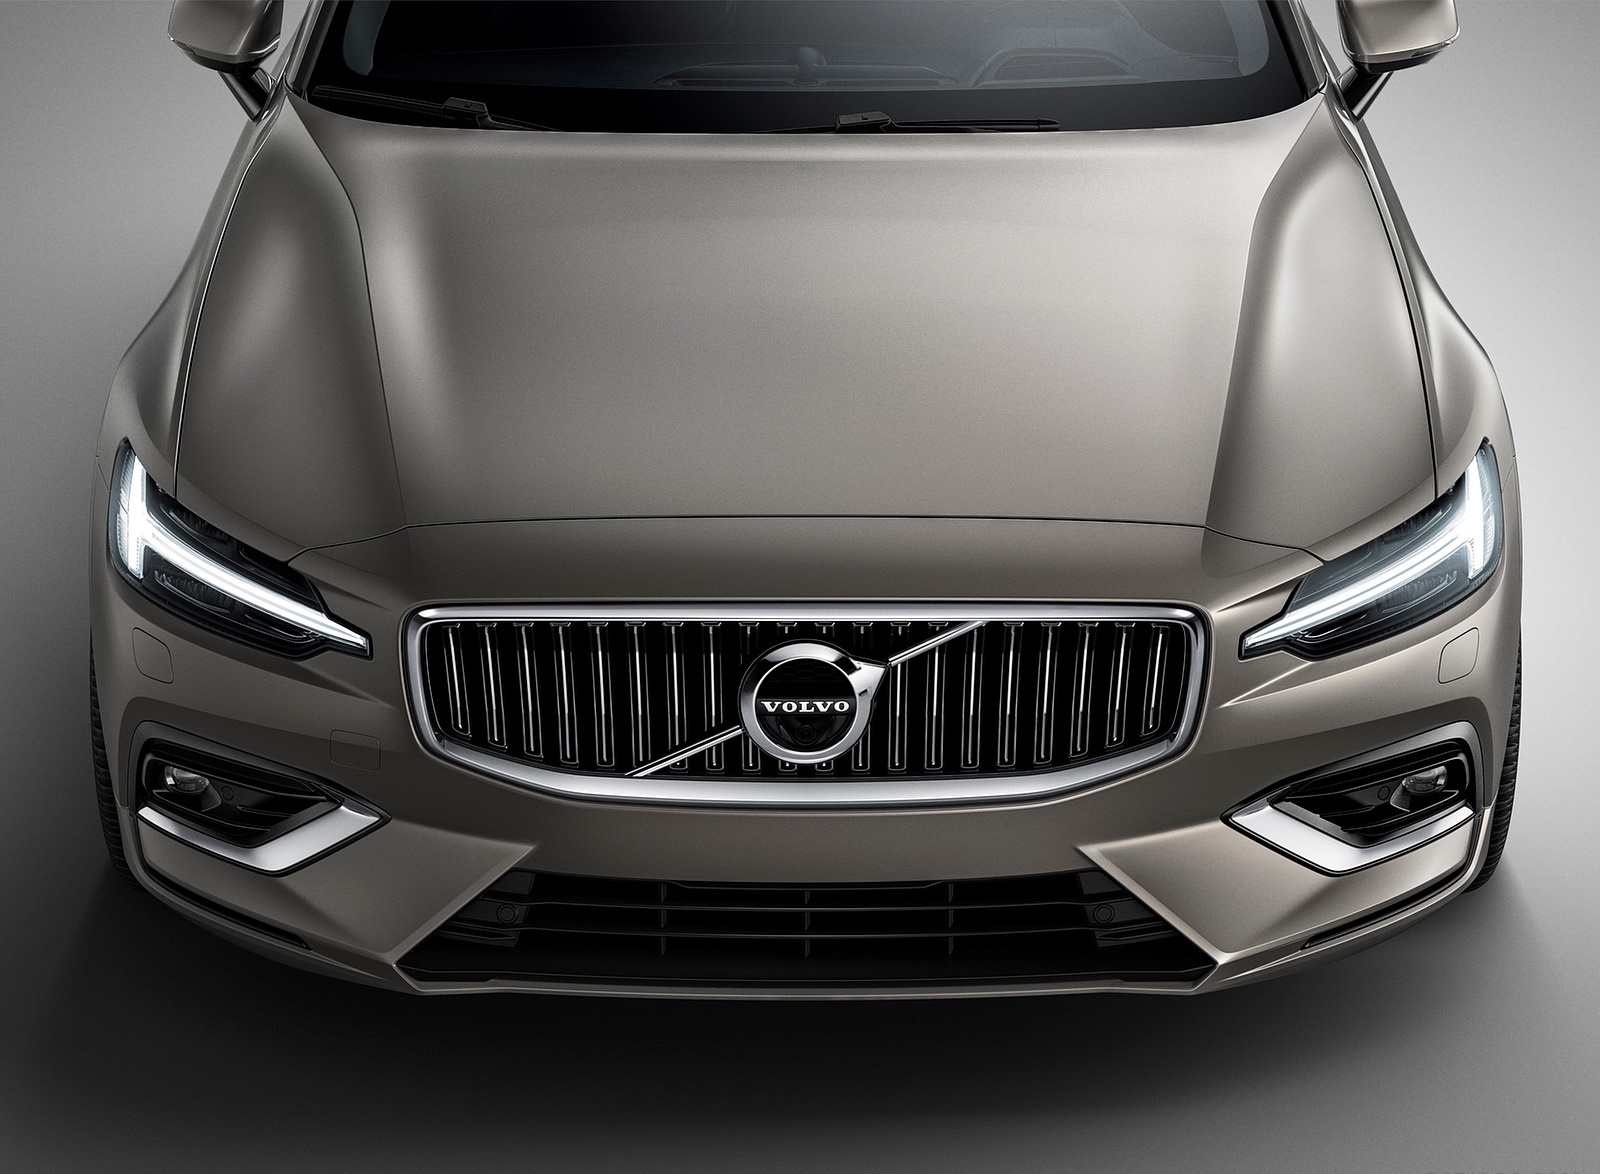 2019 Volvo V60 Grill Wallpapers #42 of 140